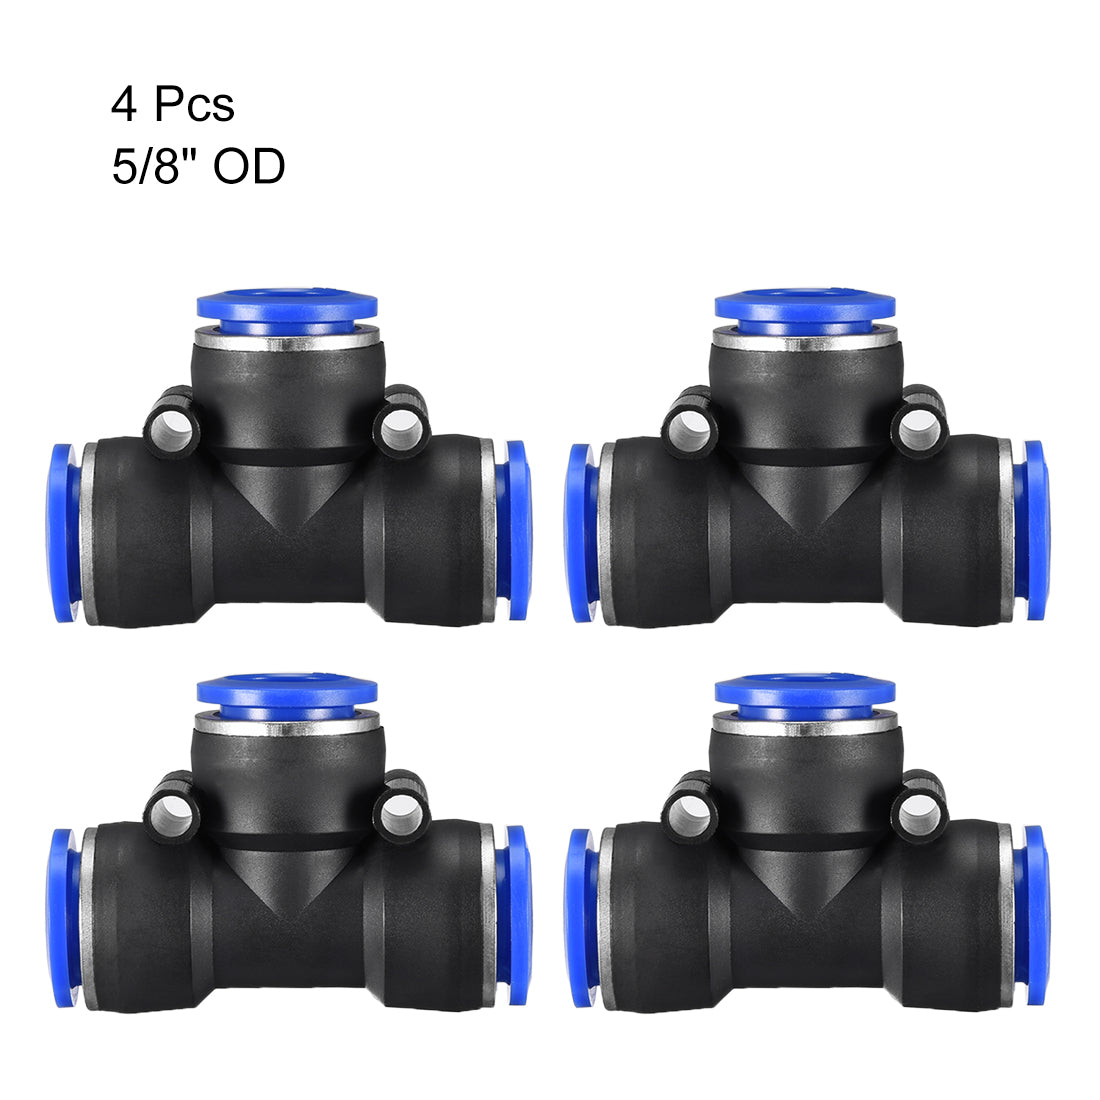 uxcell Uxcell 4pcs Push To Connect Fittings T Type Tube Connect 16mm or 5/8" od Push Fit Fittings Tube Fittings Push Lock Blue (16mm T tee)